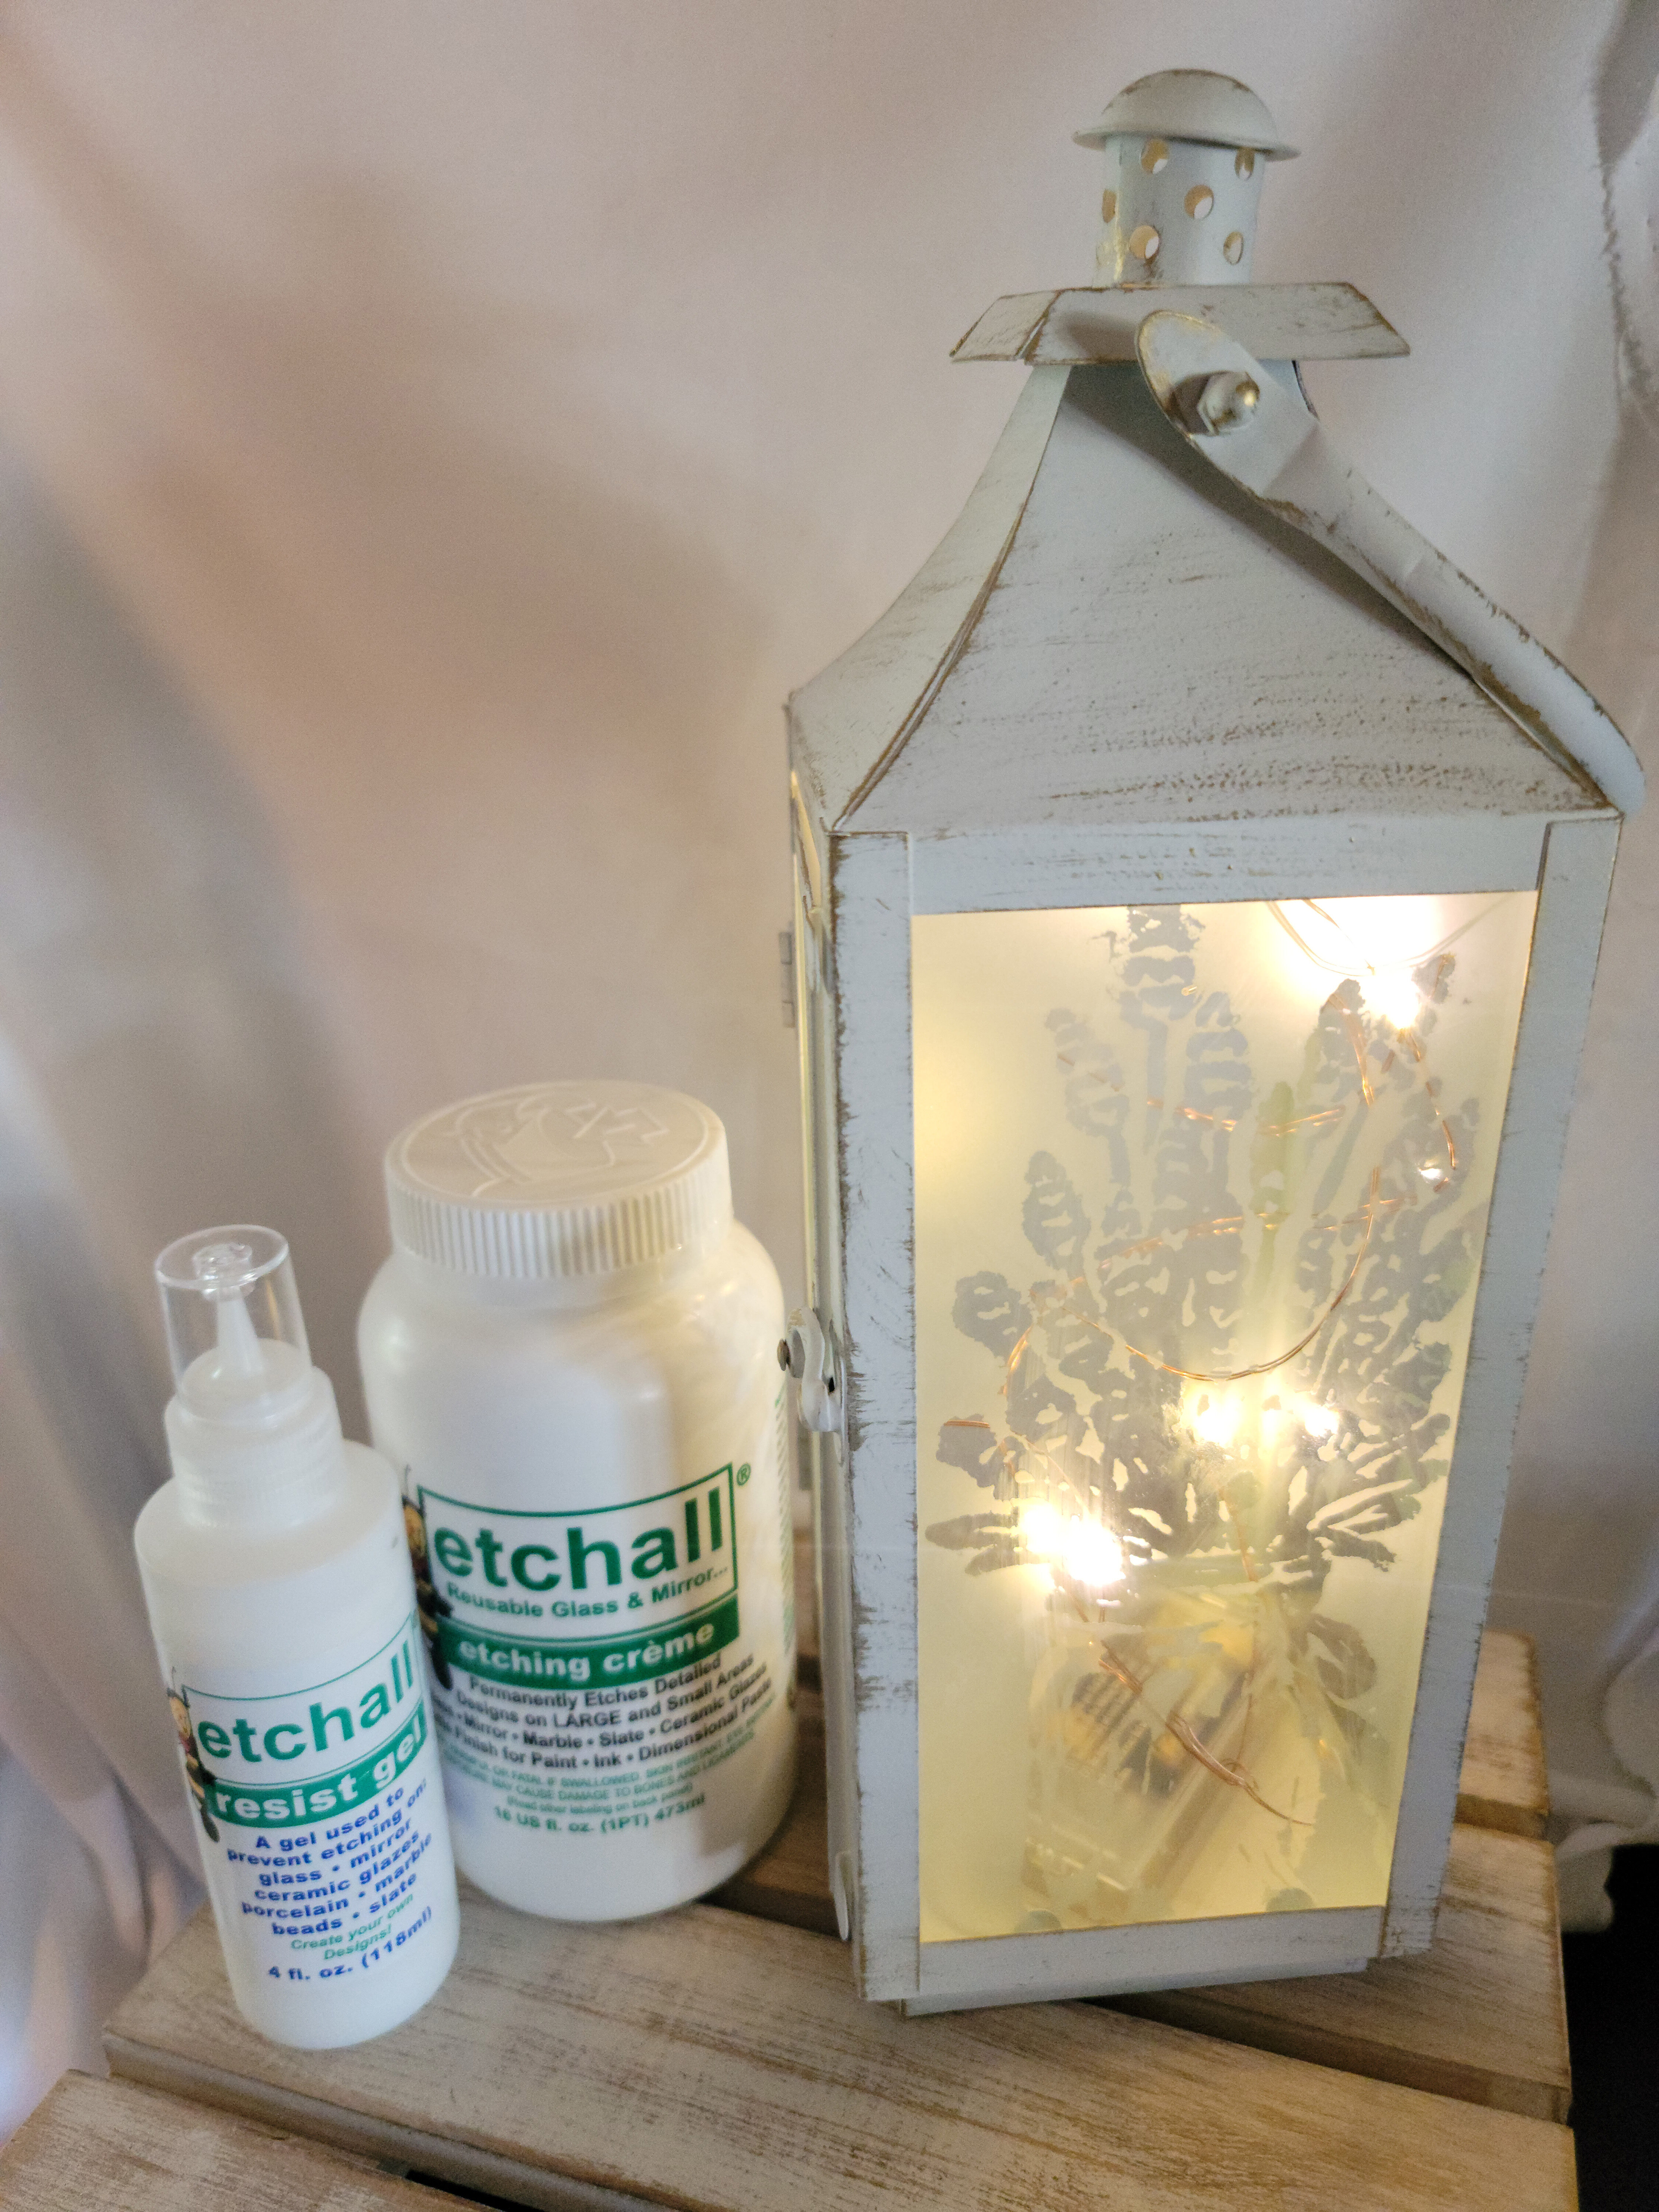 Etched Glass Lantern featuring Etchall - Forty11 Designs